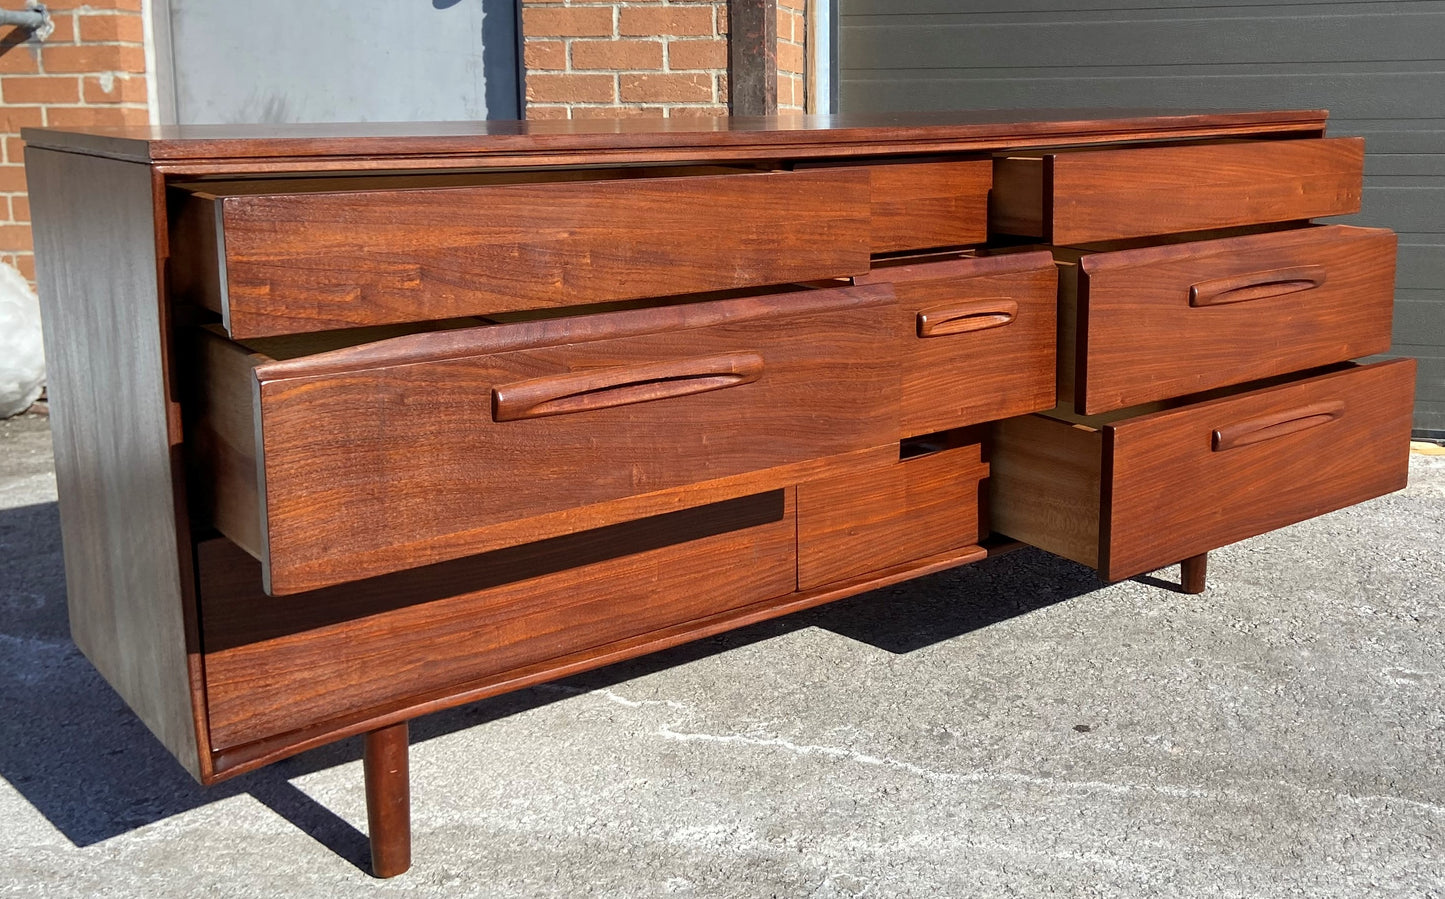 REFINISHED Mid Century Modern SOLID TEAK Dresser by J. Kuypers for Imperial